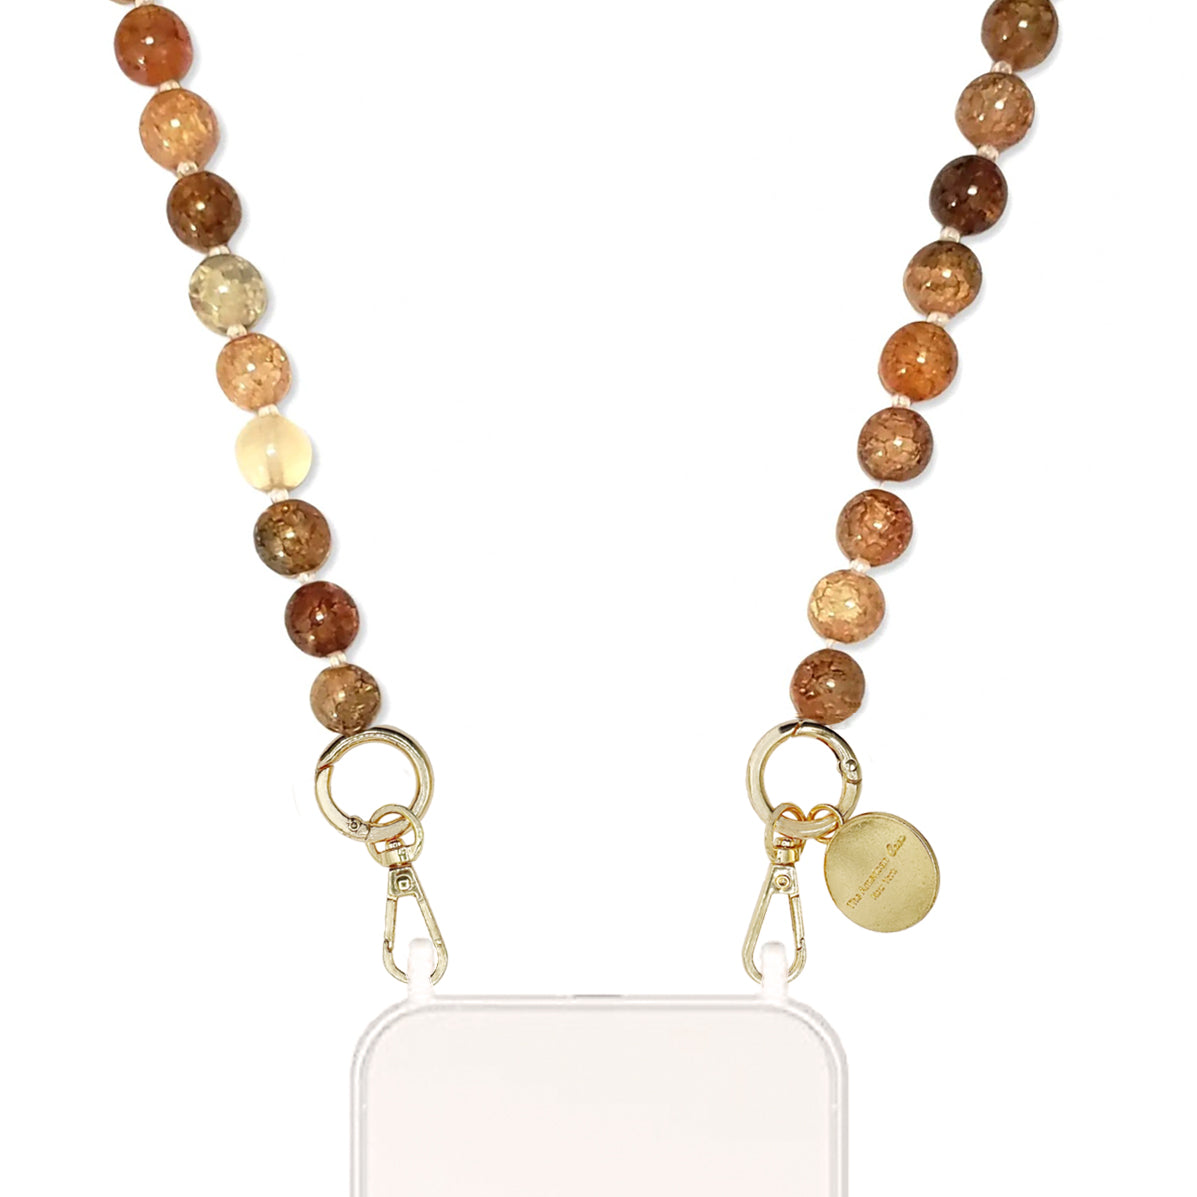 Suri - Brown Crackle Bead Chain with Golden Carabiners